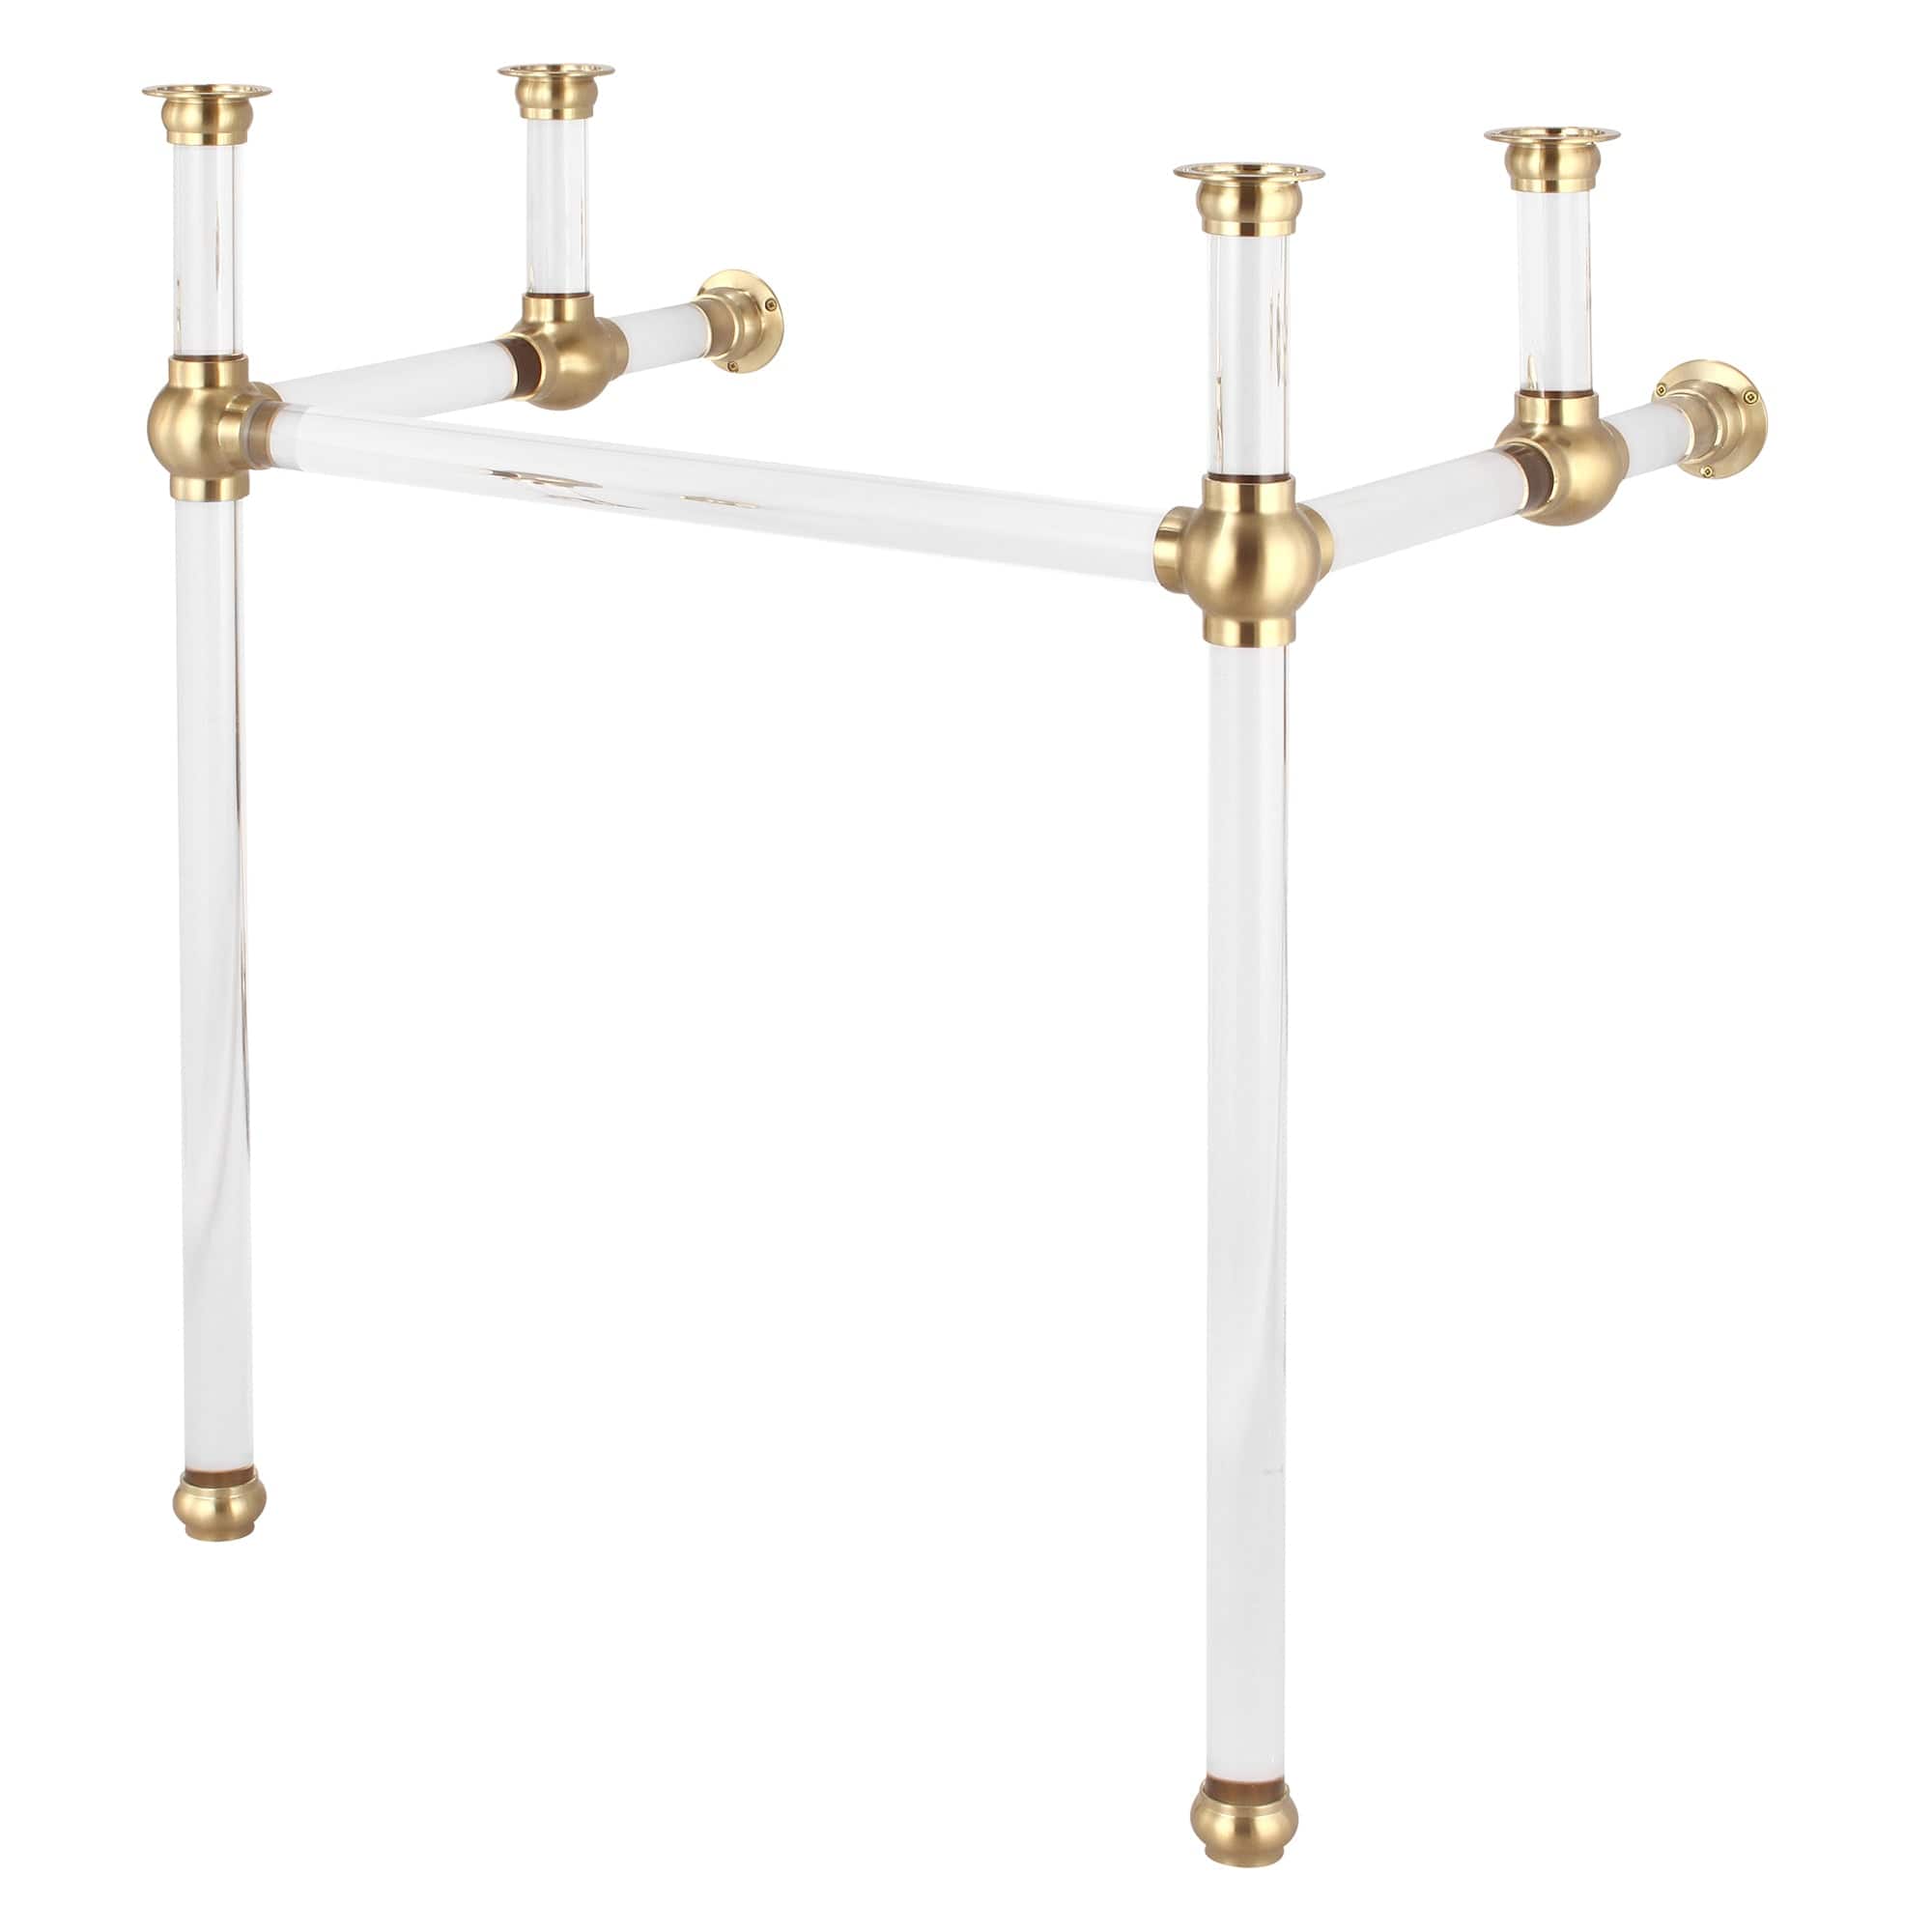 Empire 30 Inch Wide Single Wash Stand and P-Trap included in Satin Gold Finish - Molaix732030762541EP30B-0600